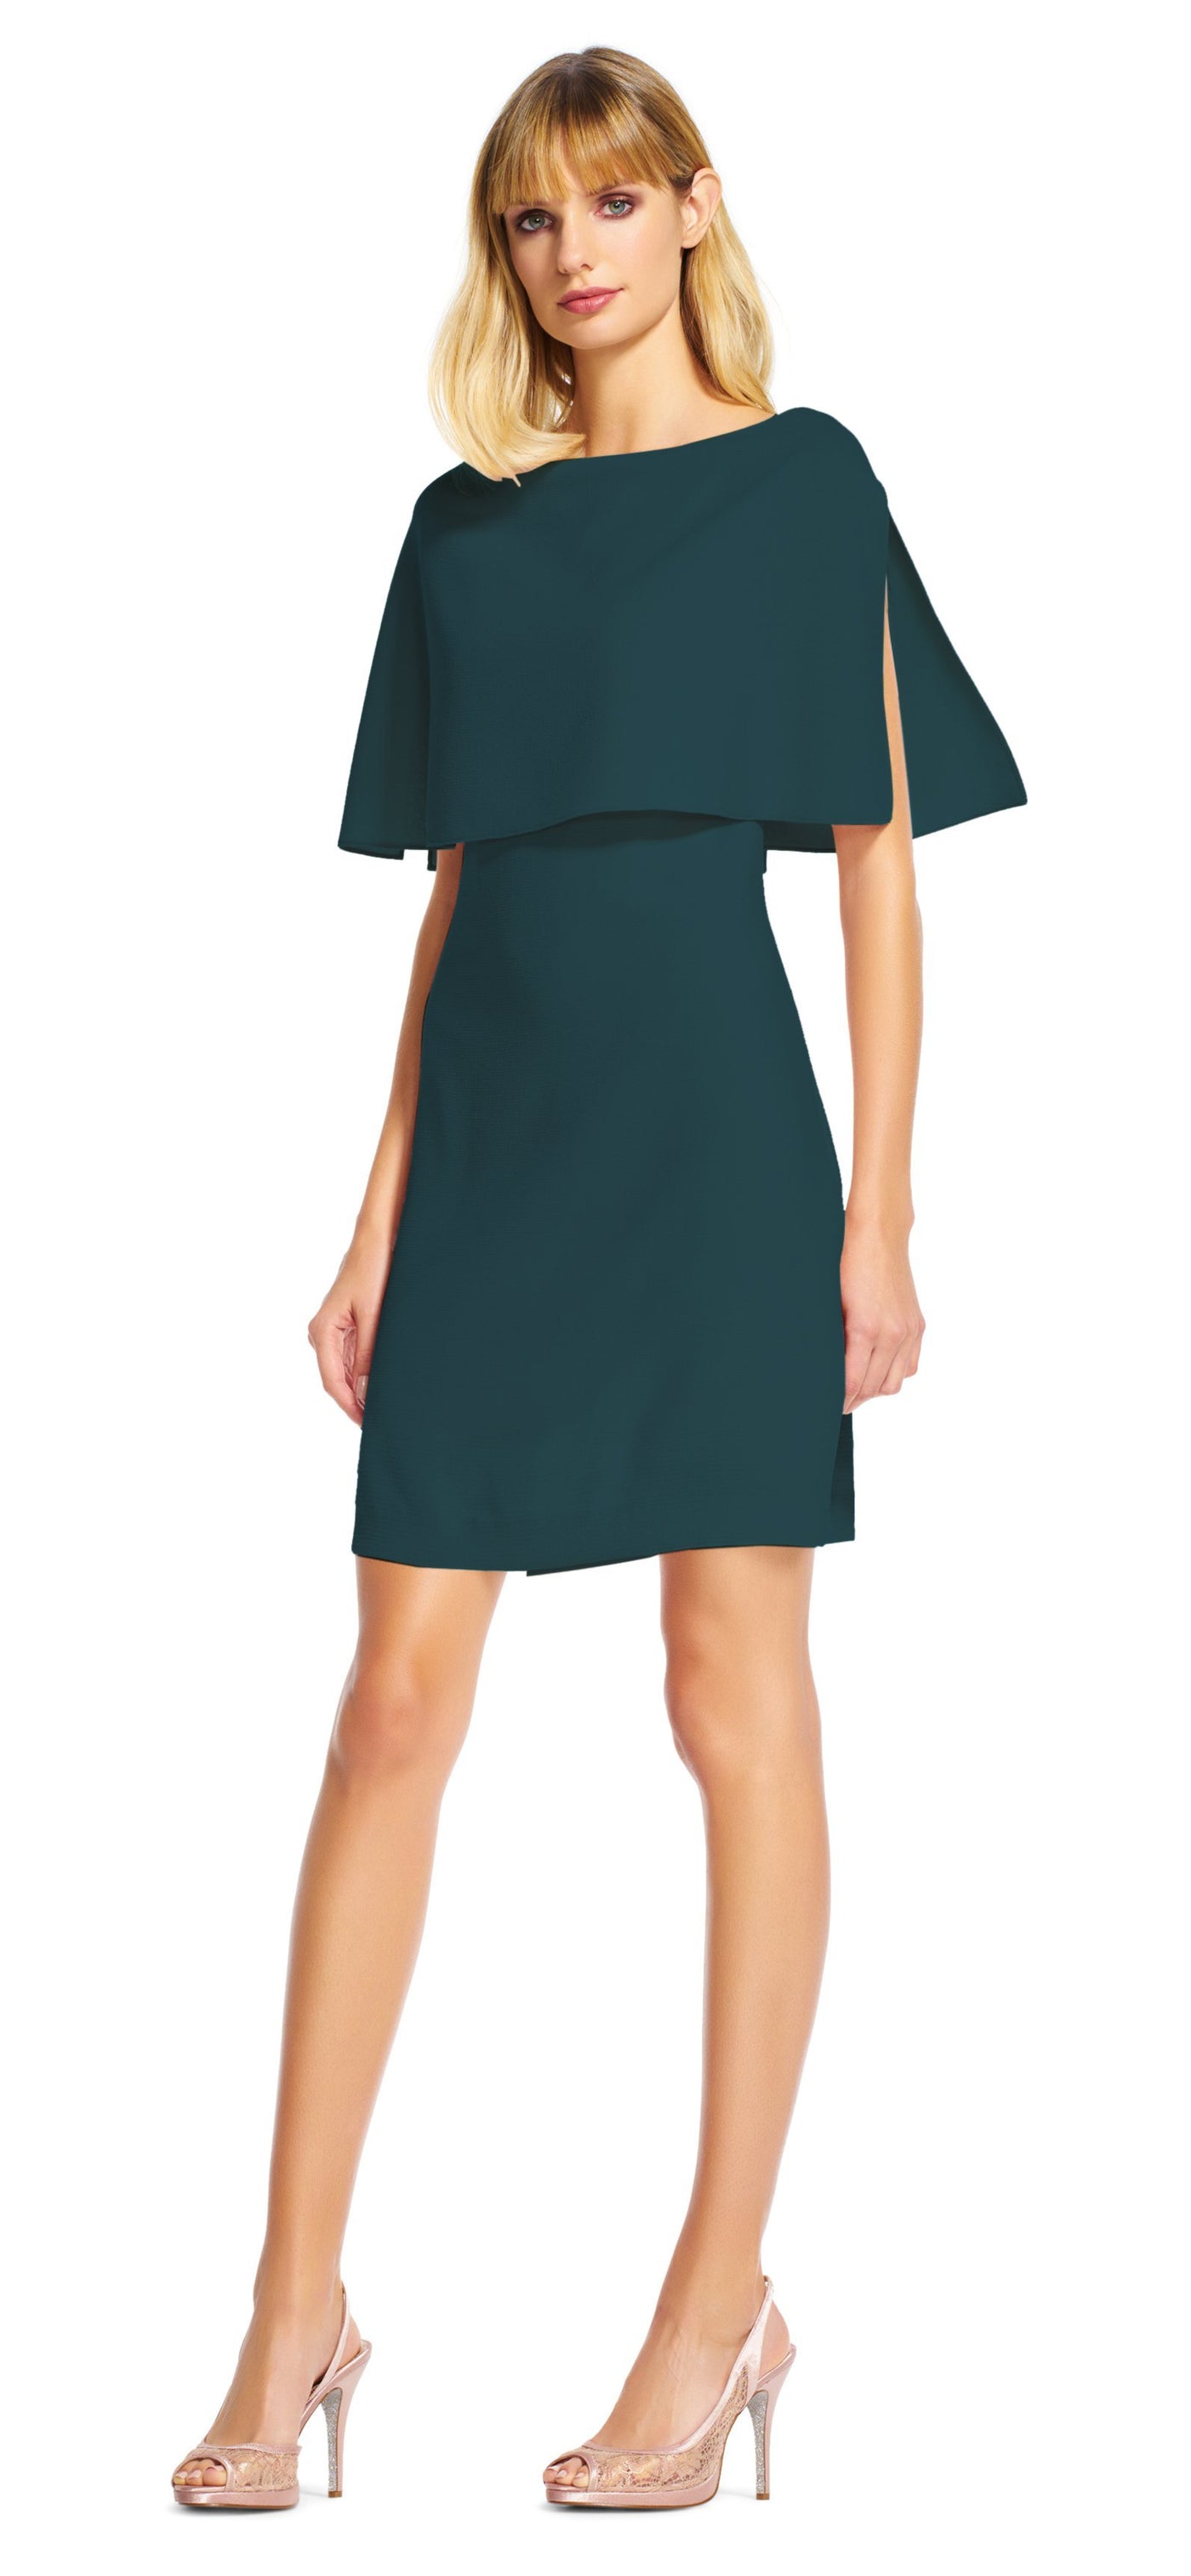 Adrianna Papell - AP1D100716 Popover Cape Crepe Shift Dress in Green